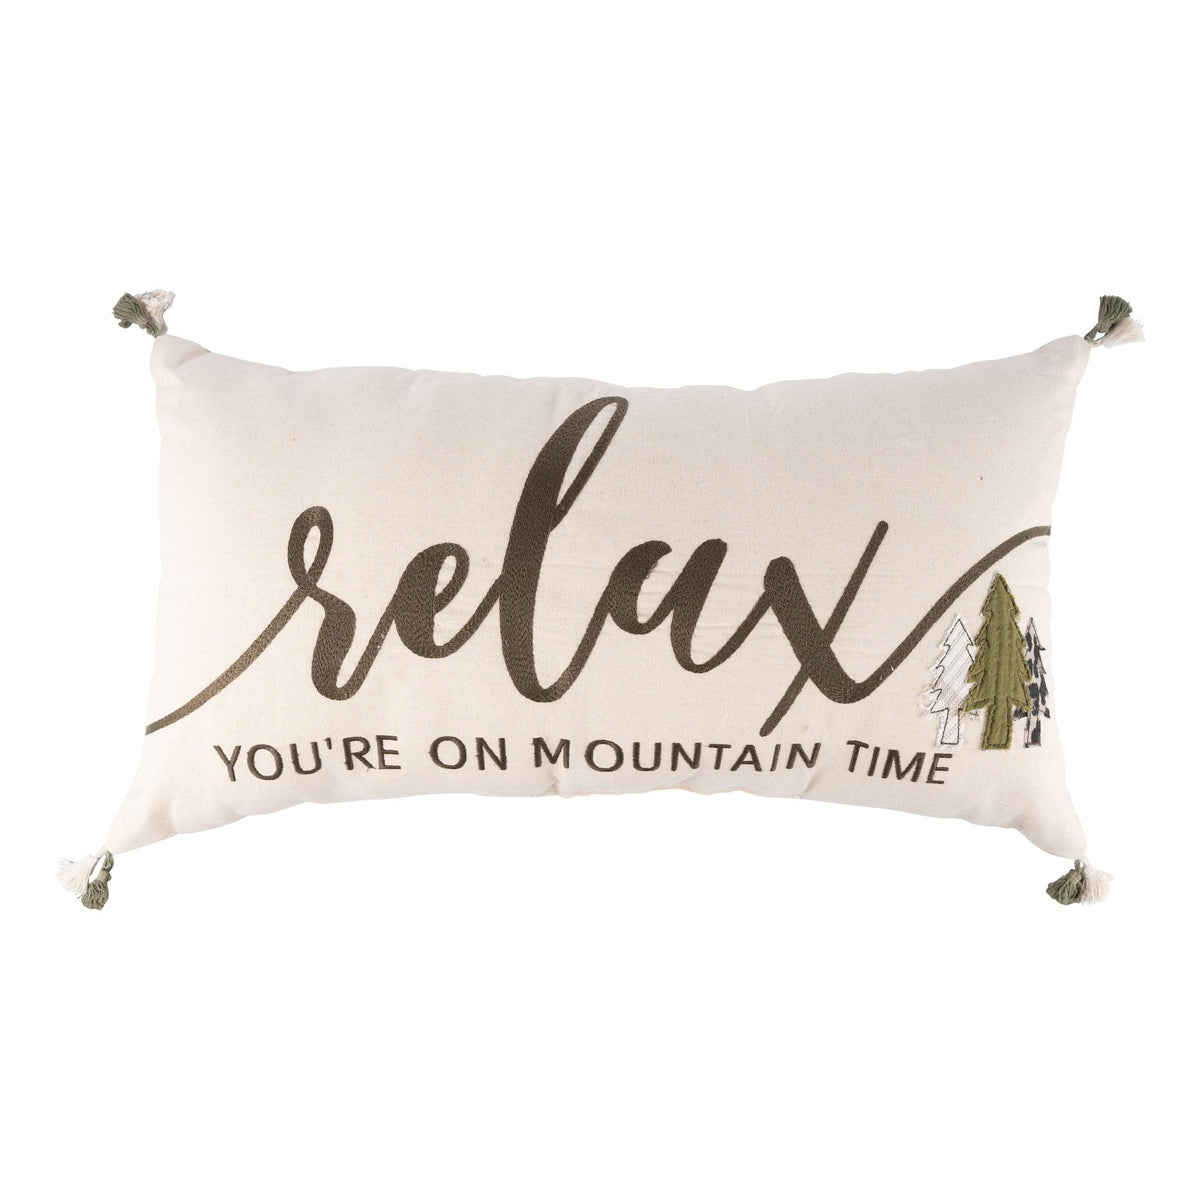 Relax on Mountain Time Pillow - GLORY HAUS 